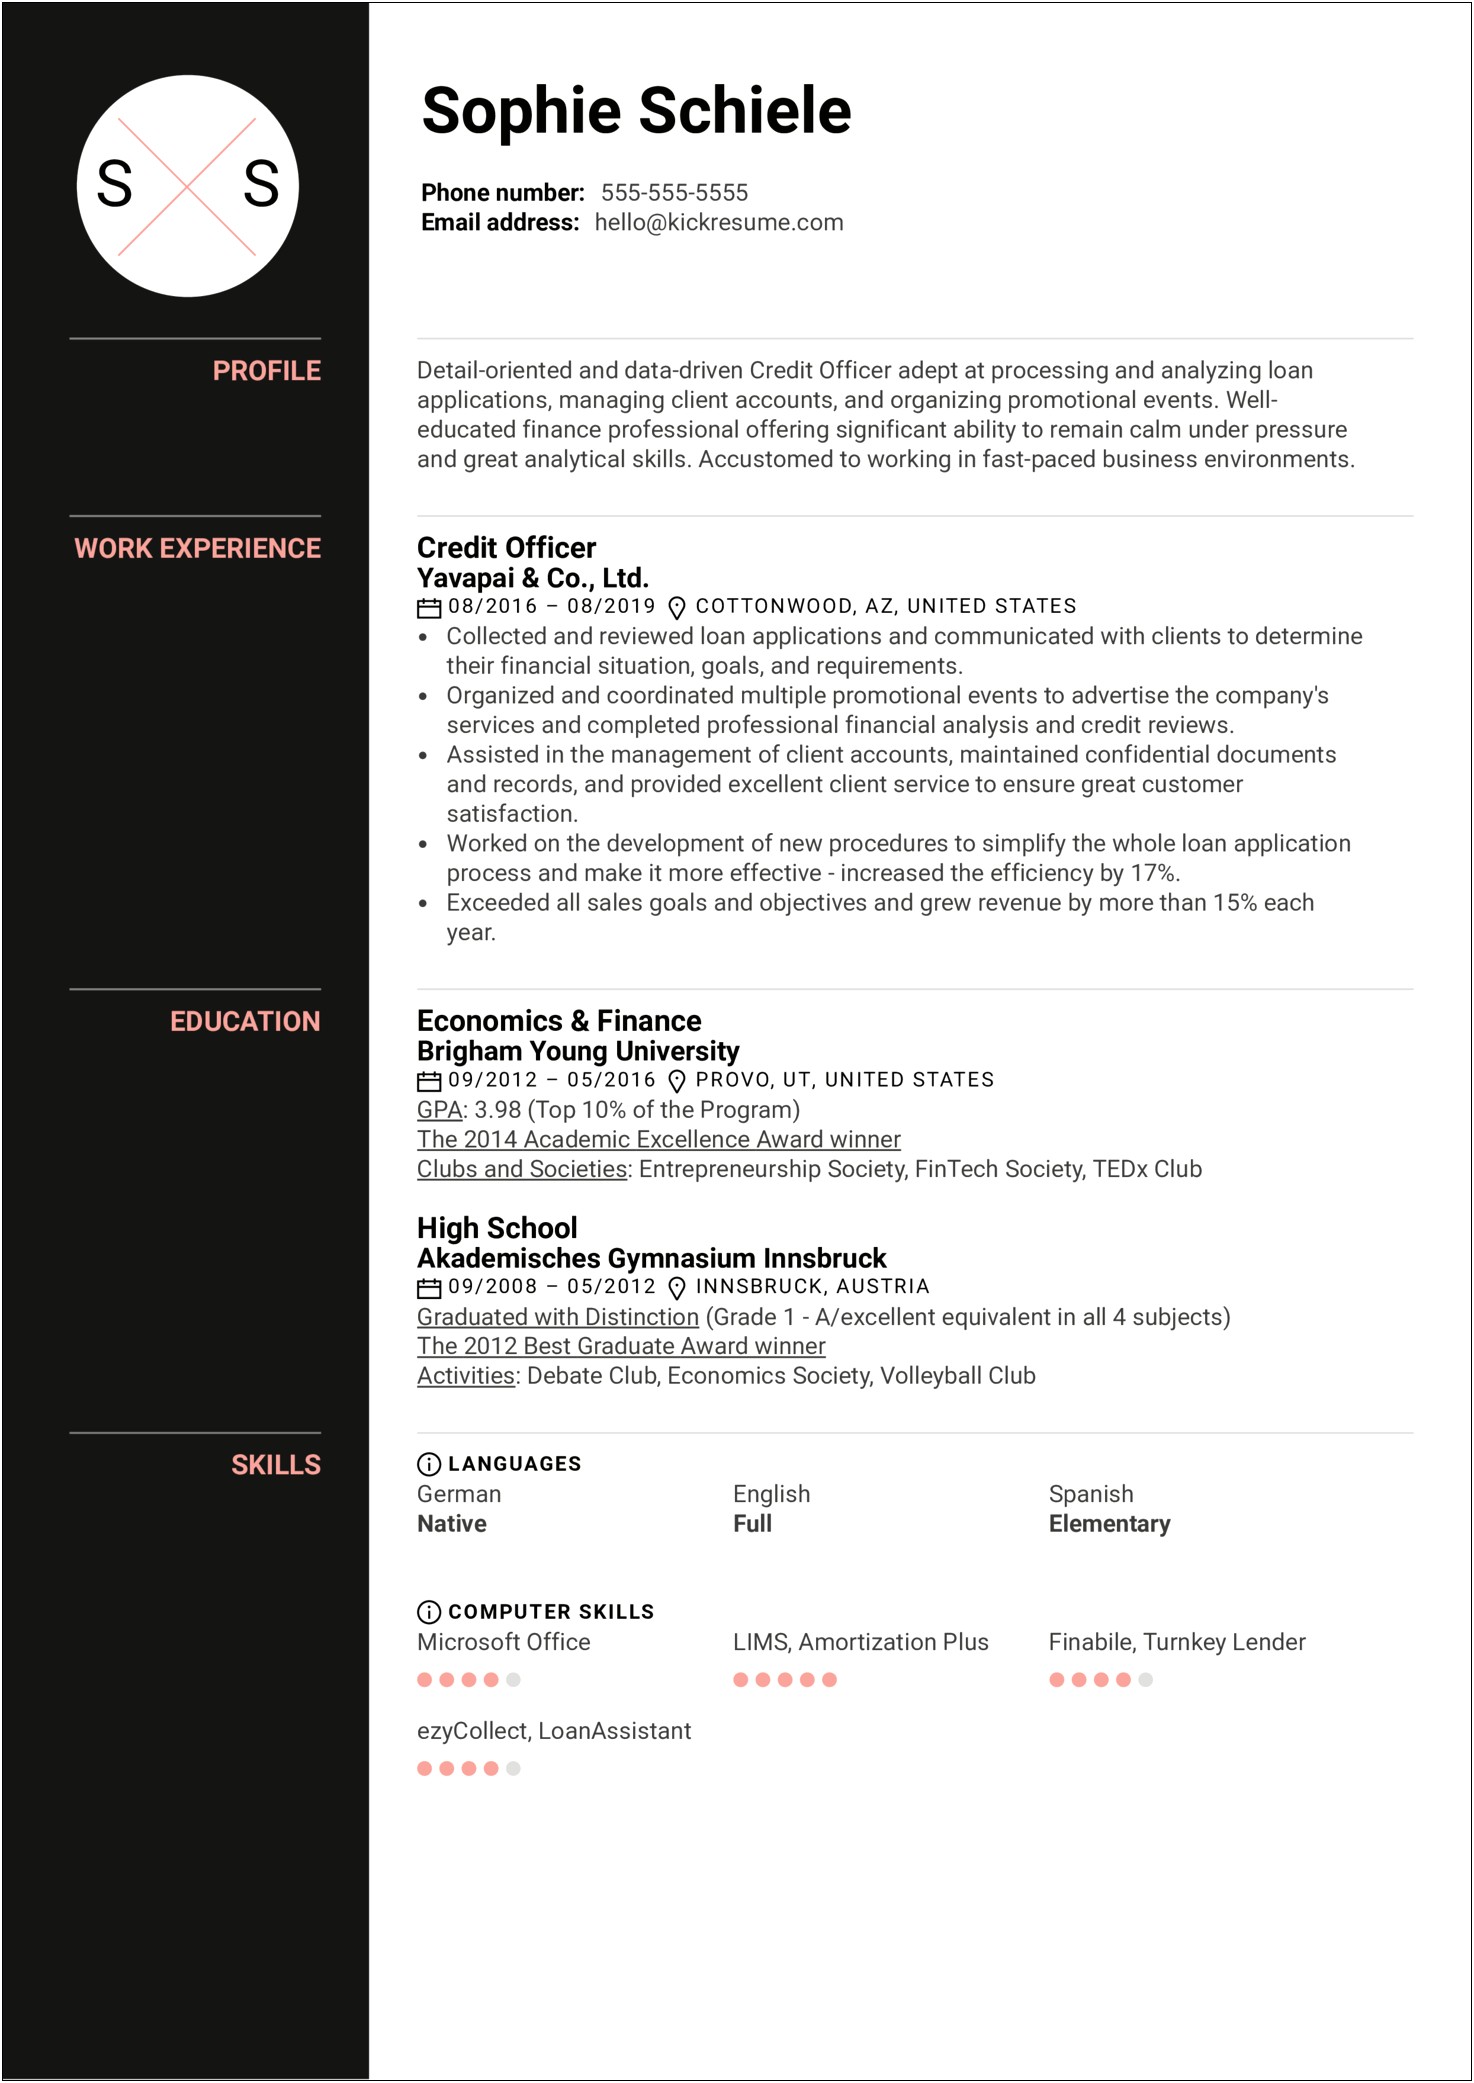 Resume Summary Examples For Loan Officers